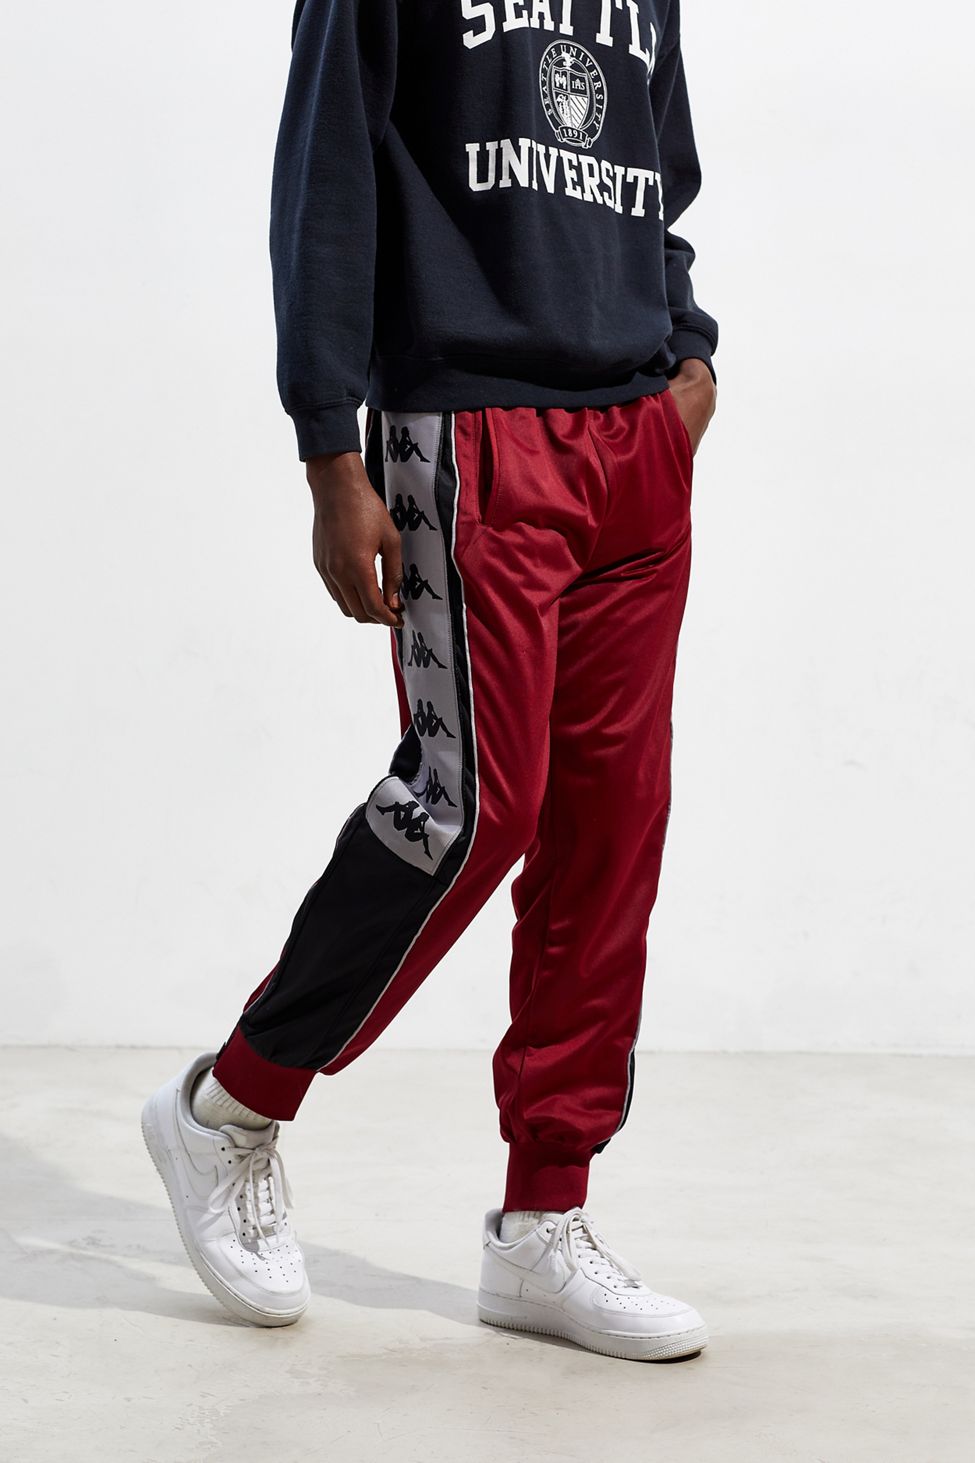 Urban Outfitters on Twitter: "we're always into a Kappa track pants, and  these are no exception https://t.co/3Lc7qqQ5i8 https://t.co/5STHhZ1Dt5" /  Twitter